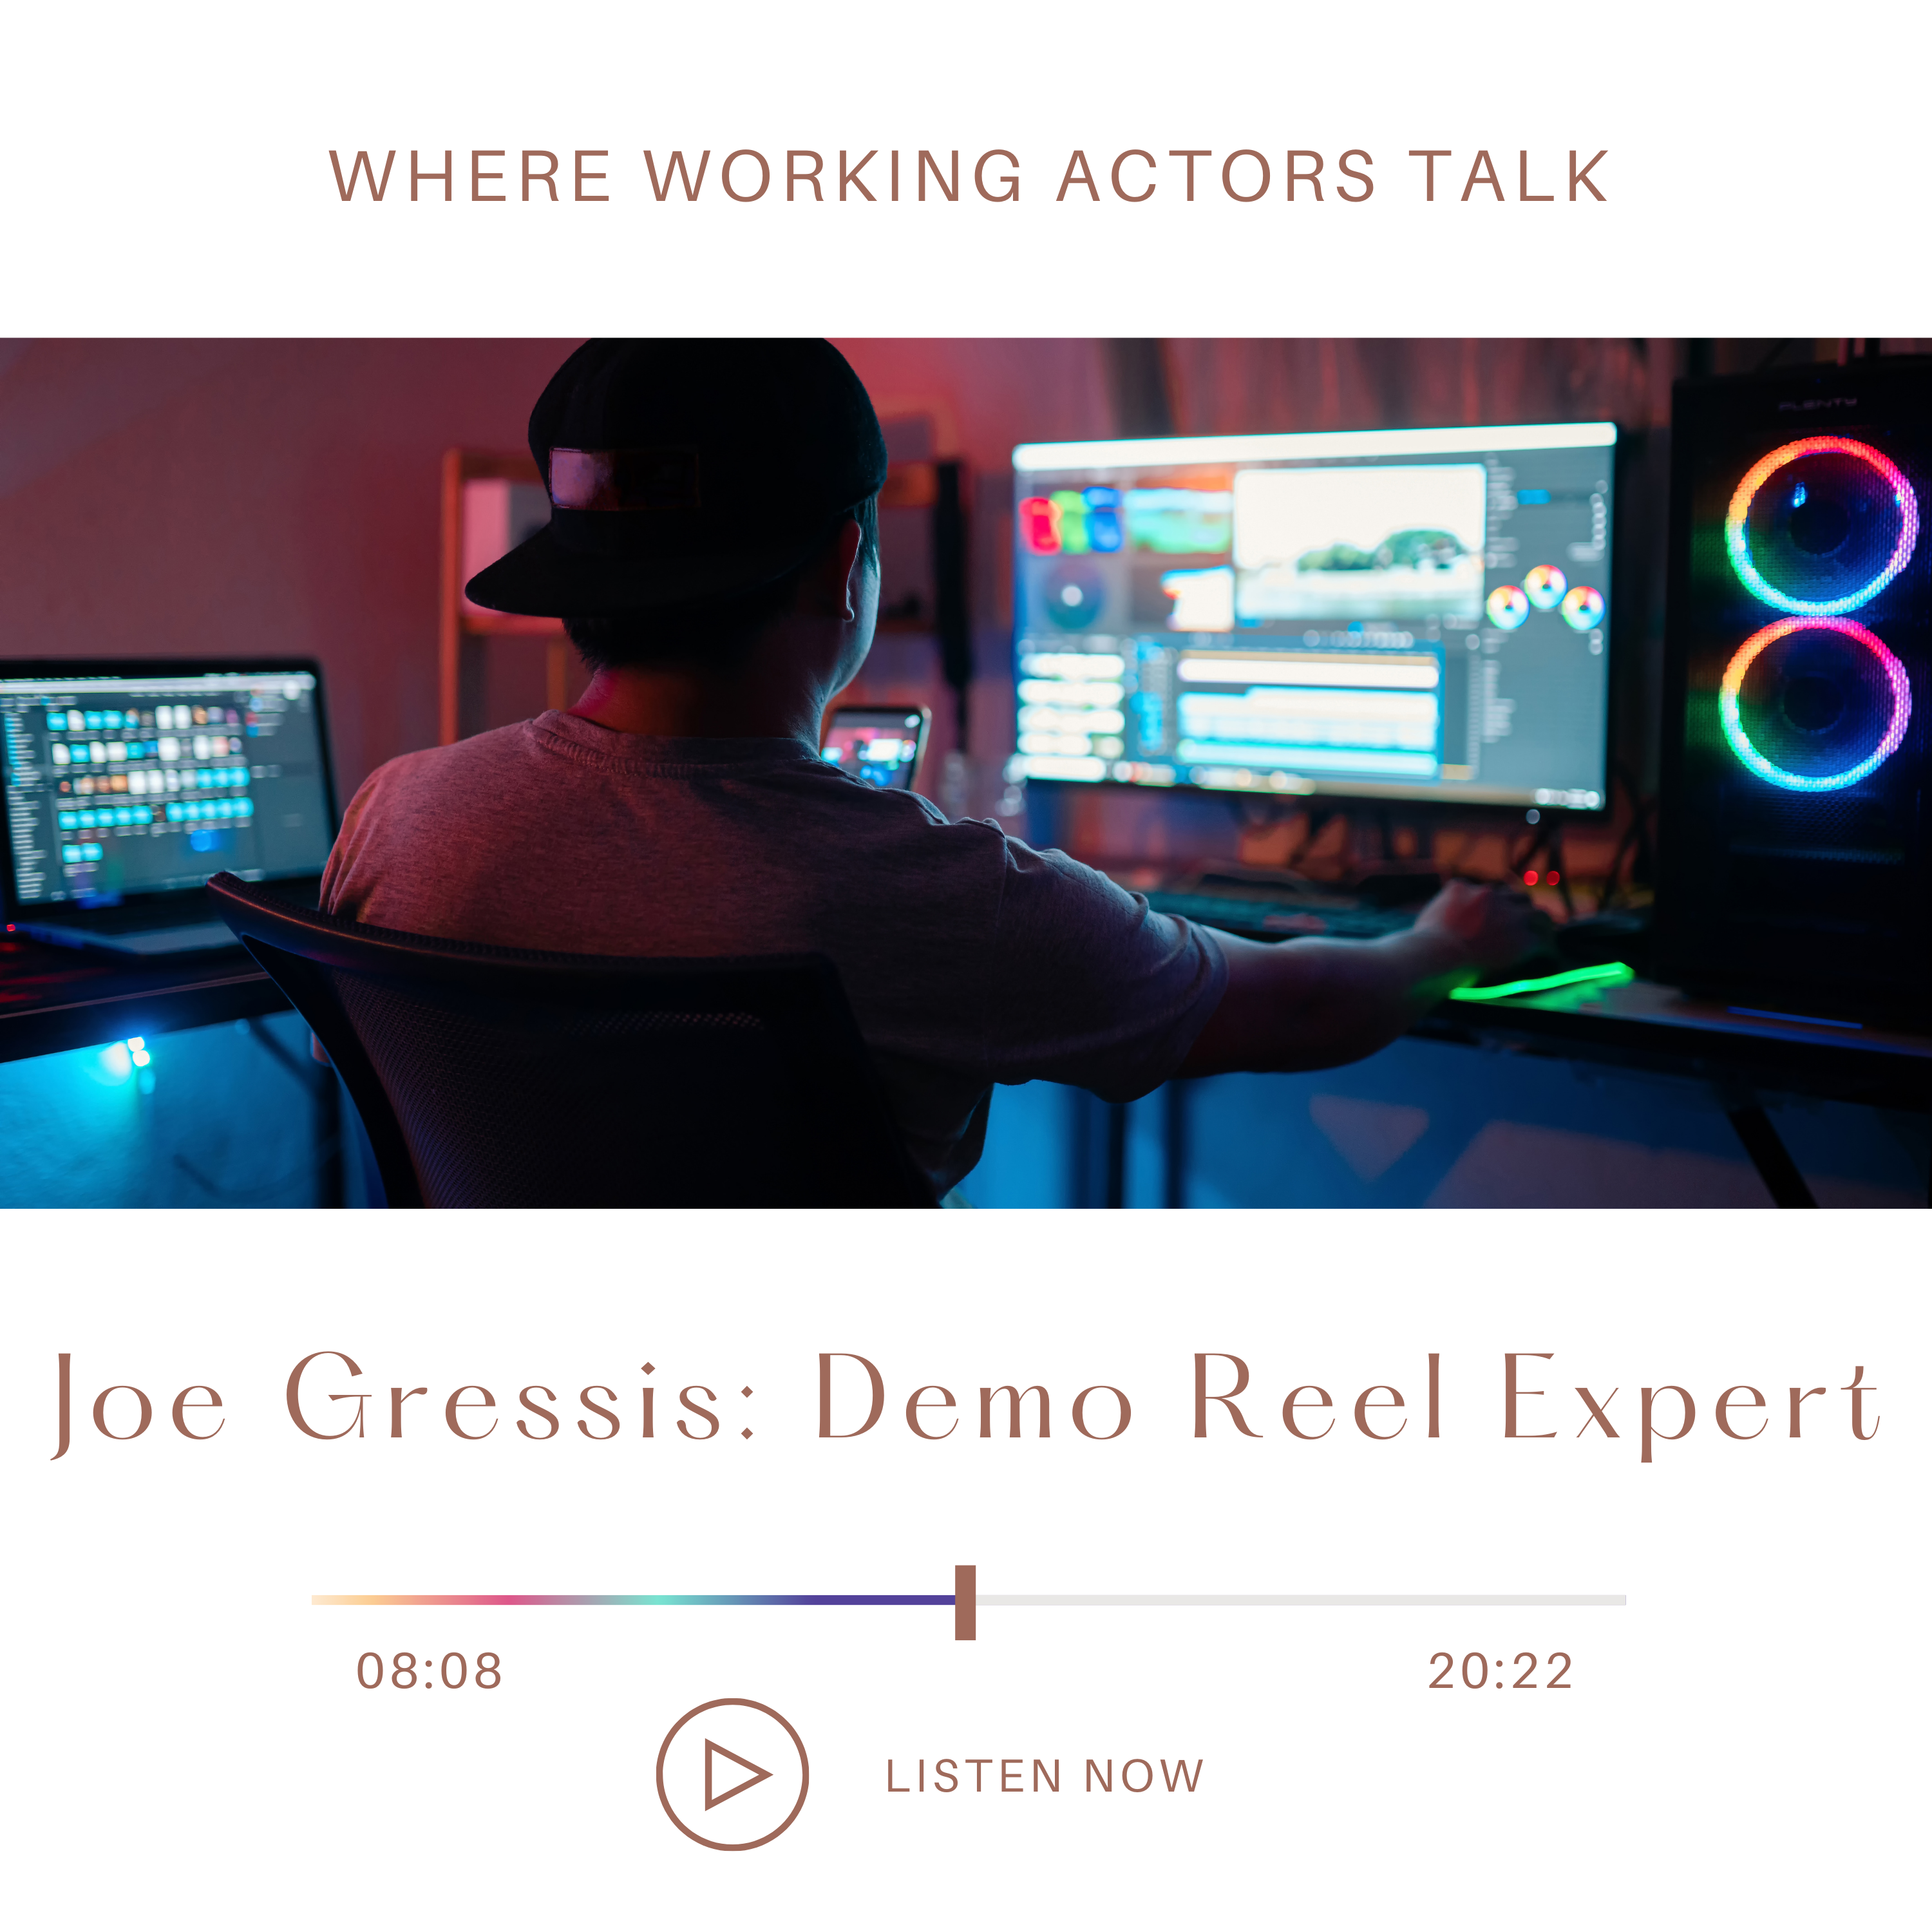 Learn from 3 time emmy-nominated writer, editor and producer Joe Gressis what makes a great demo reel for actors